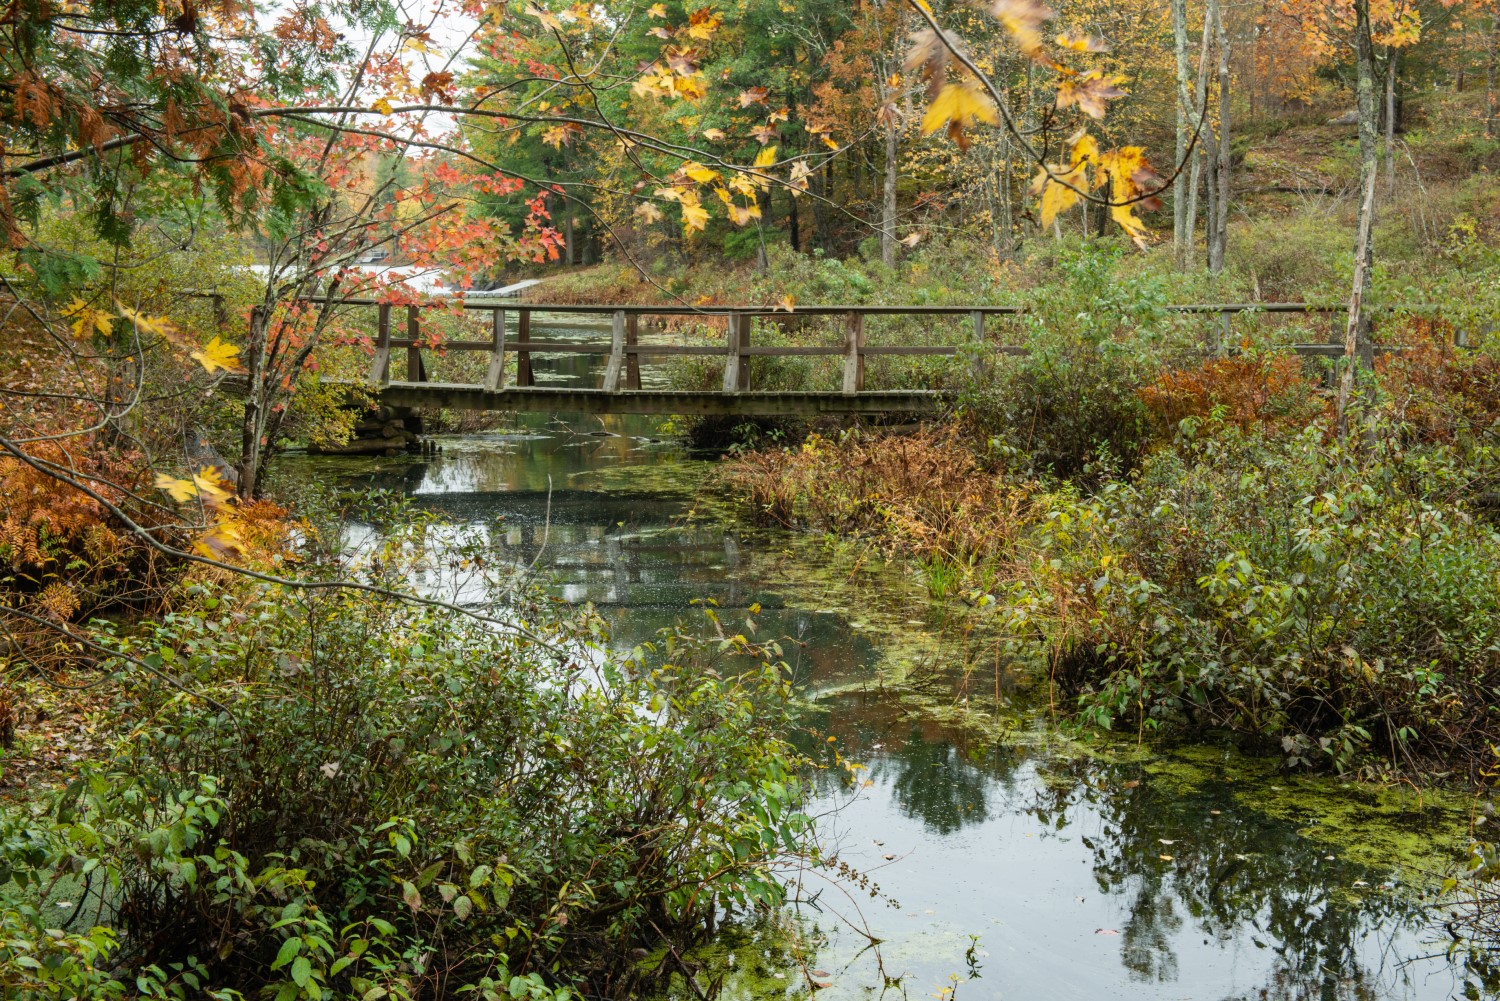 A still river passing under a wooden foot bridge in a forest in the fall.